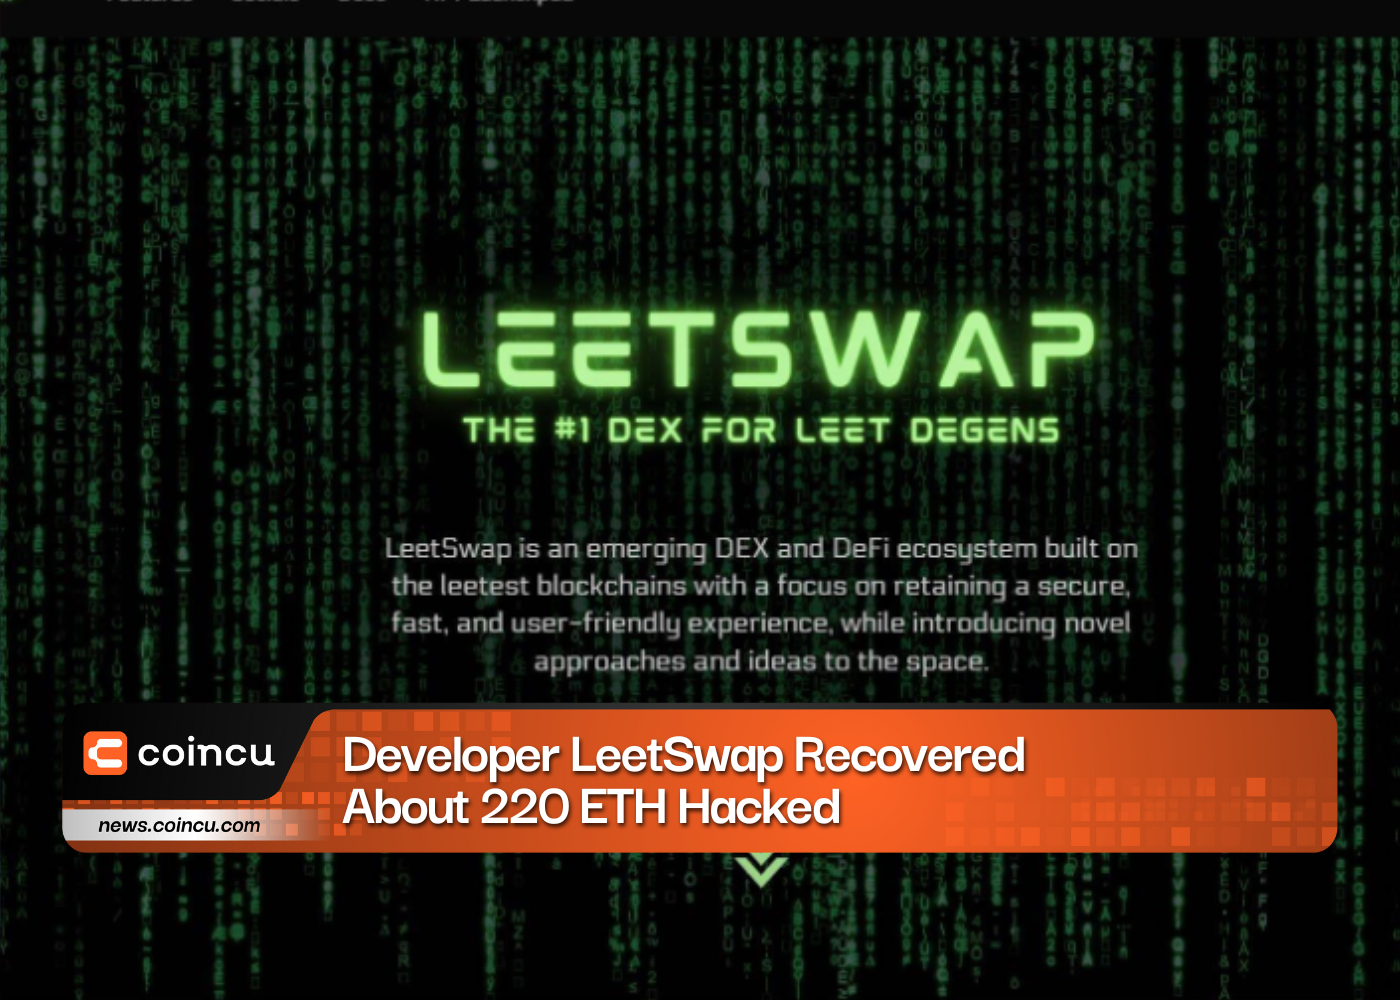 Developer LeetSwap Recovered About 220 ETH Hacked